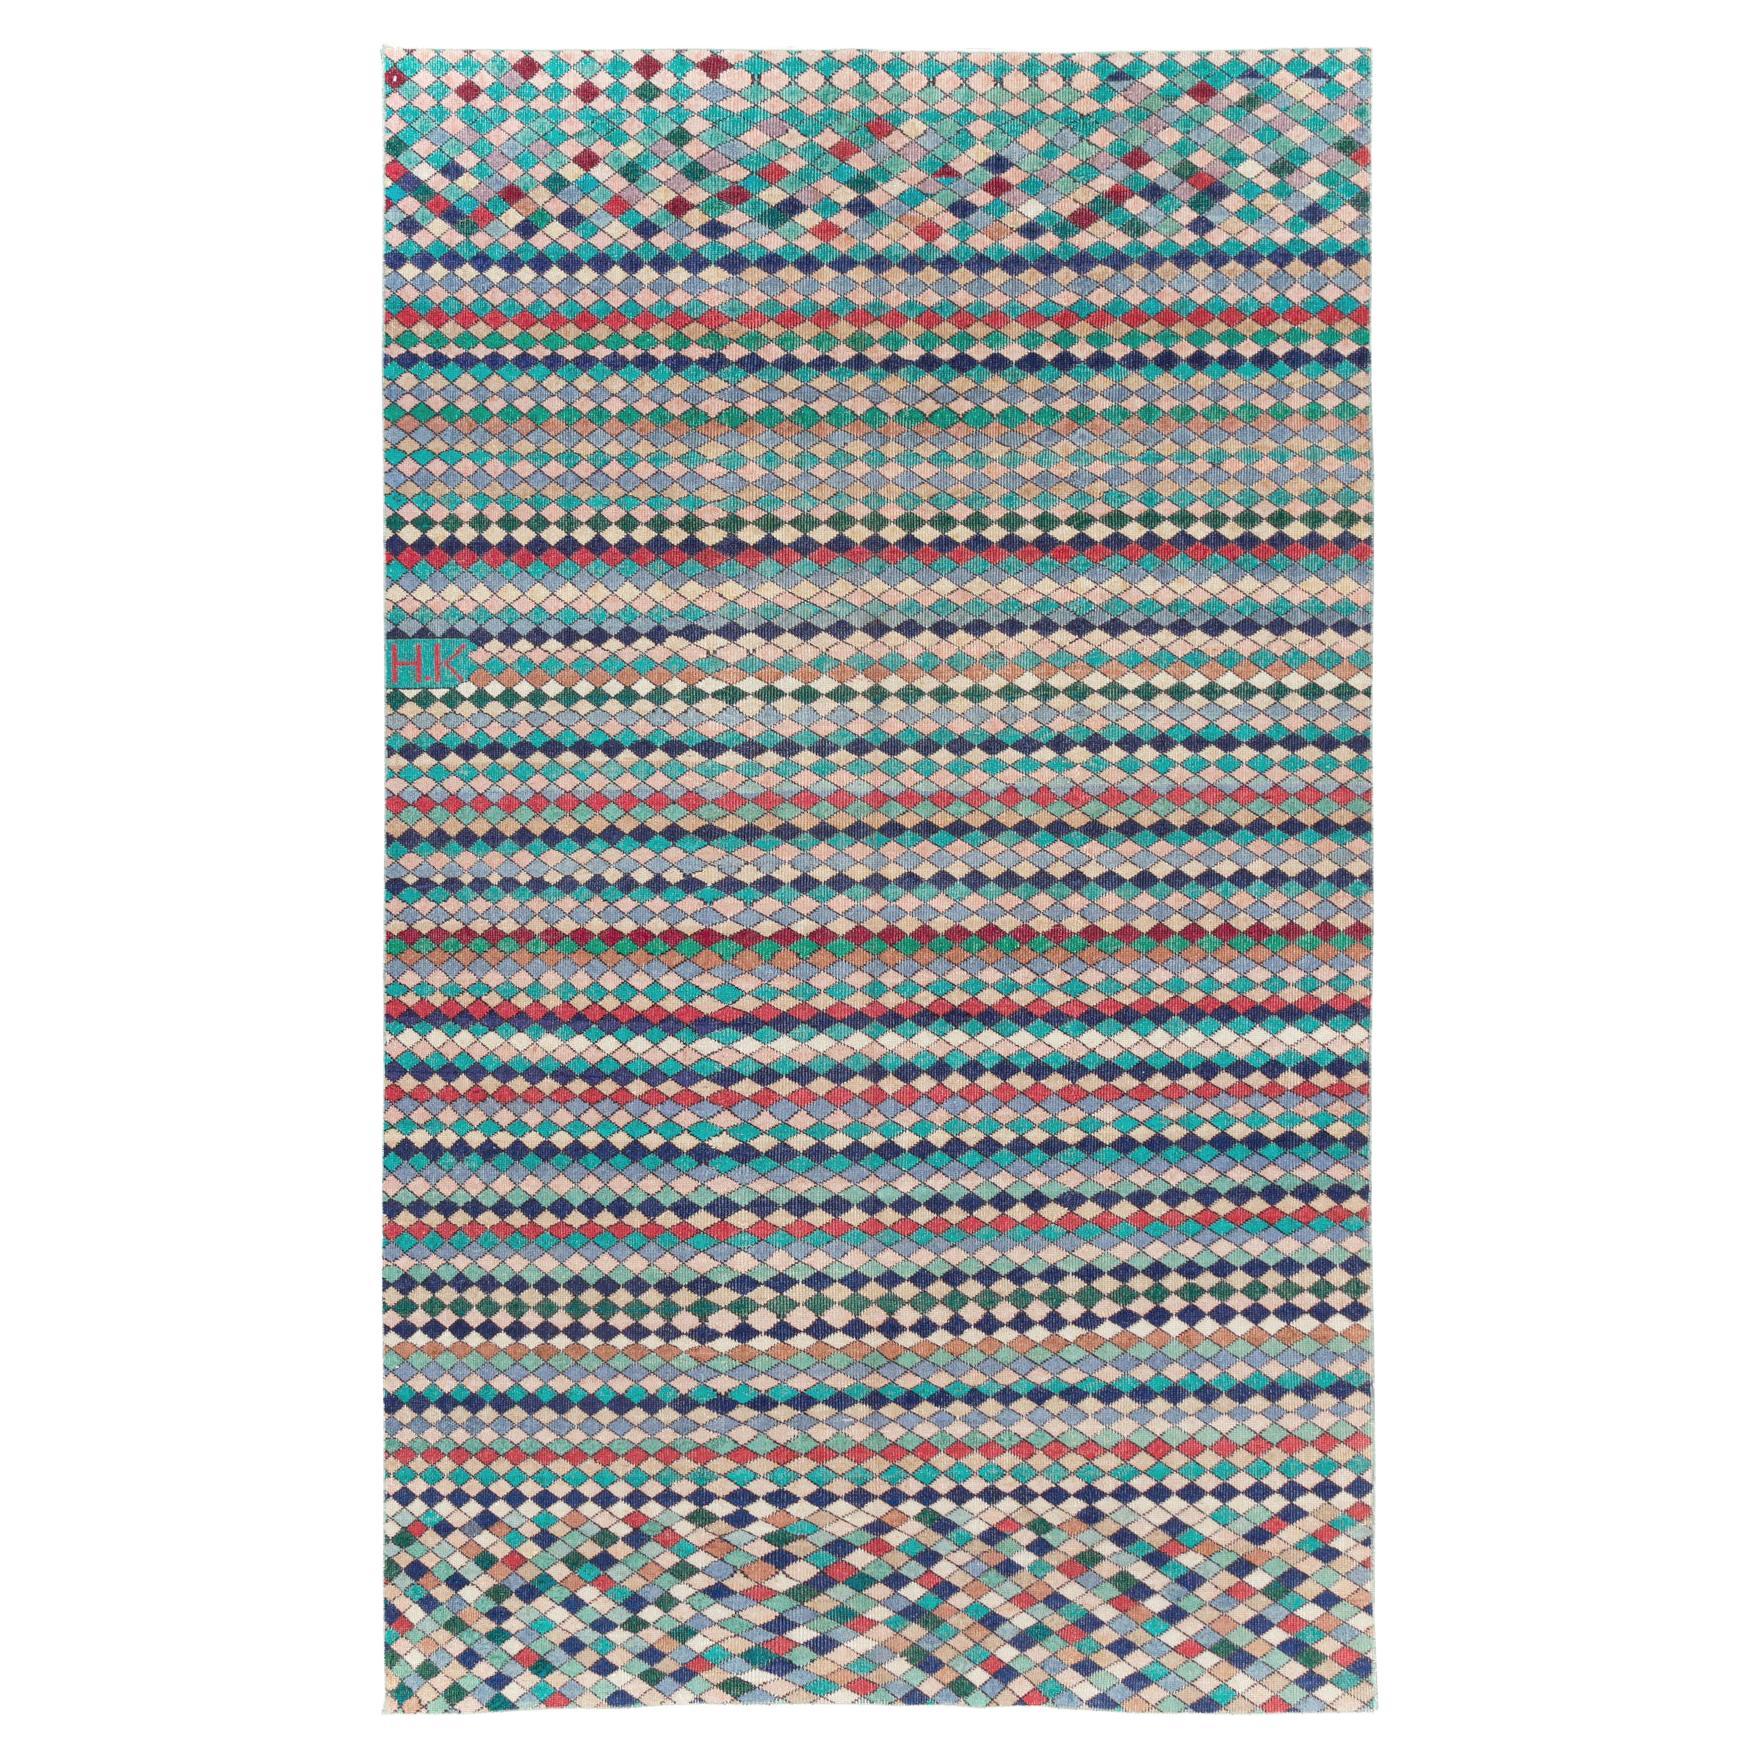 Mid-20th Century Handmade Turkish Accent Rug in Teal and Turquoise